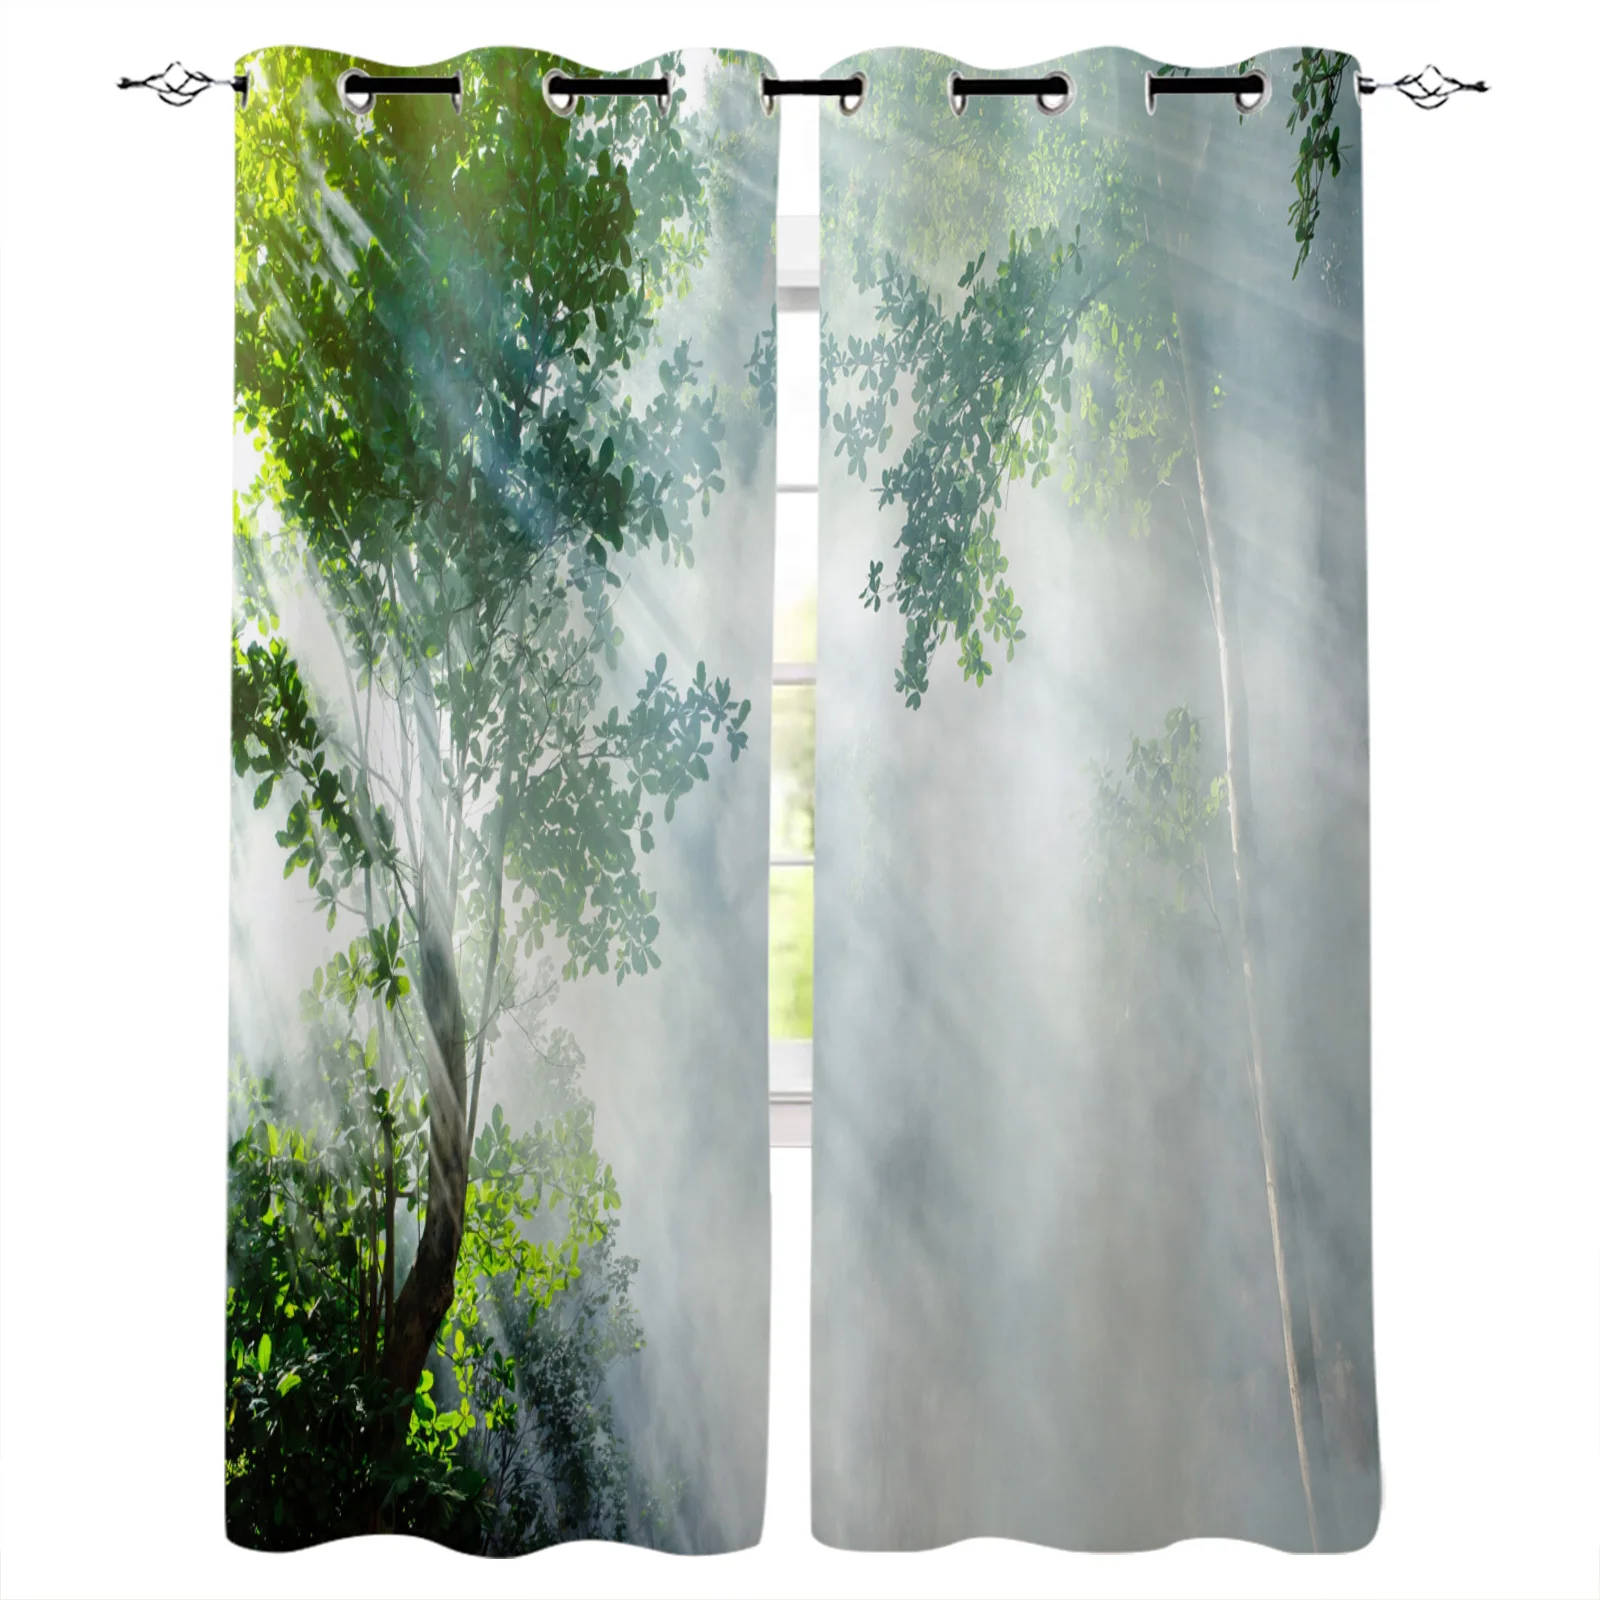 

Sunlight Forest Green Plant White Fog Curtains for Living Room Bedroom Kitchen Window Treatment Curtain Home Decoration